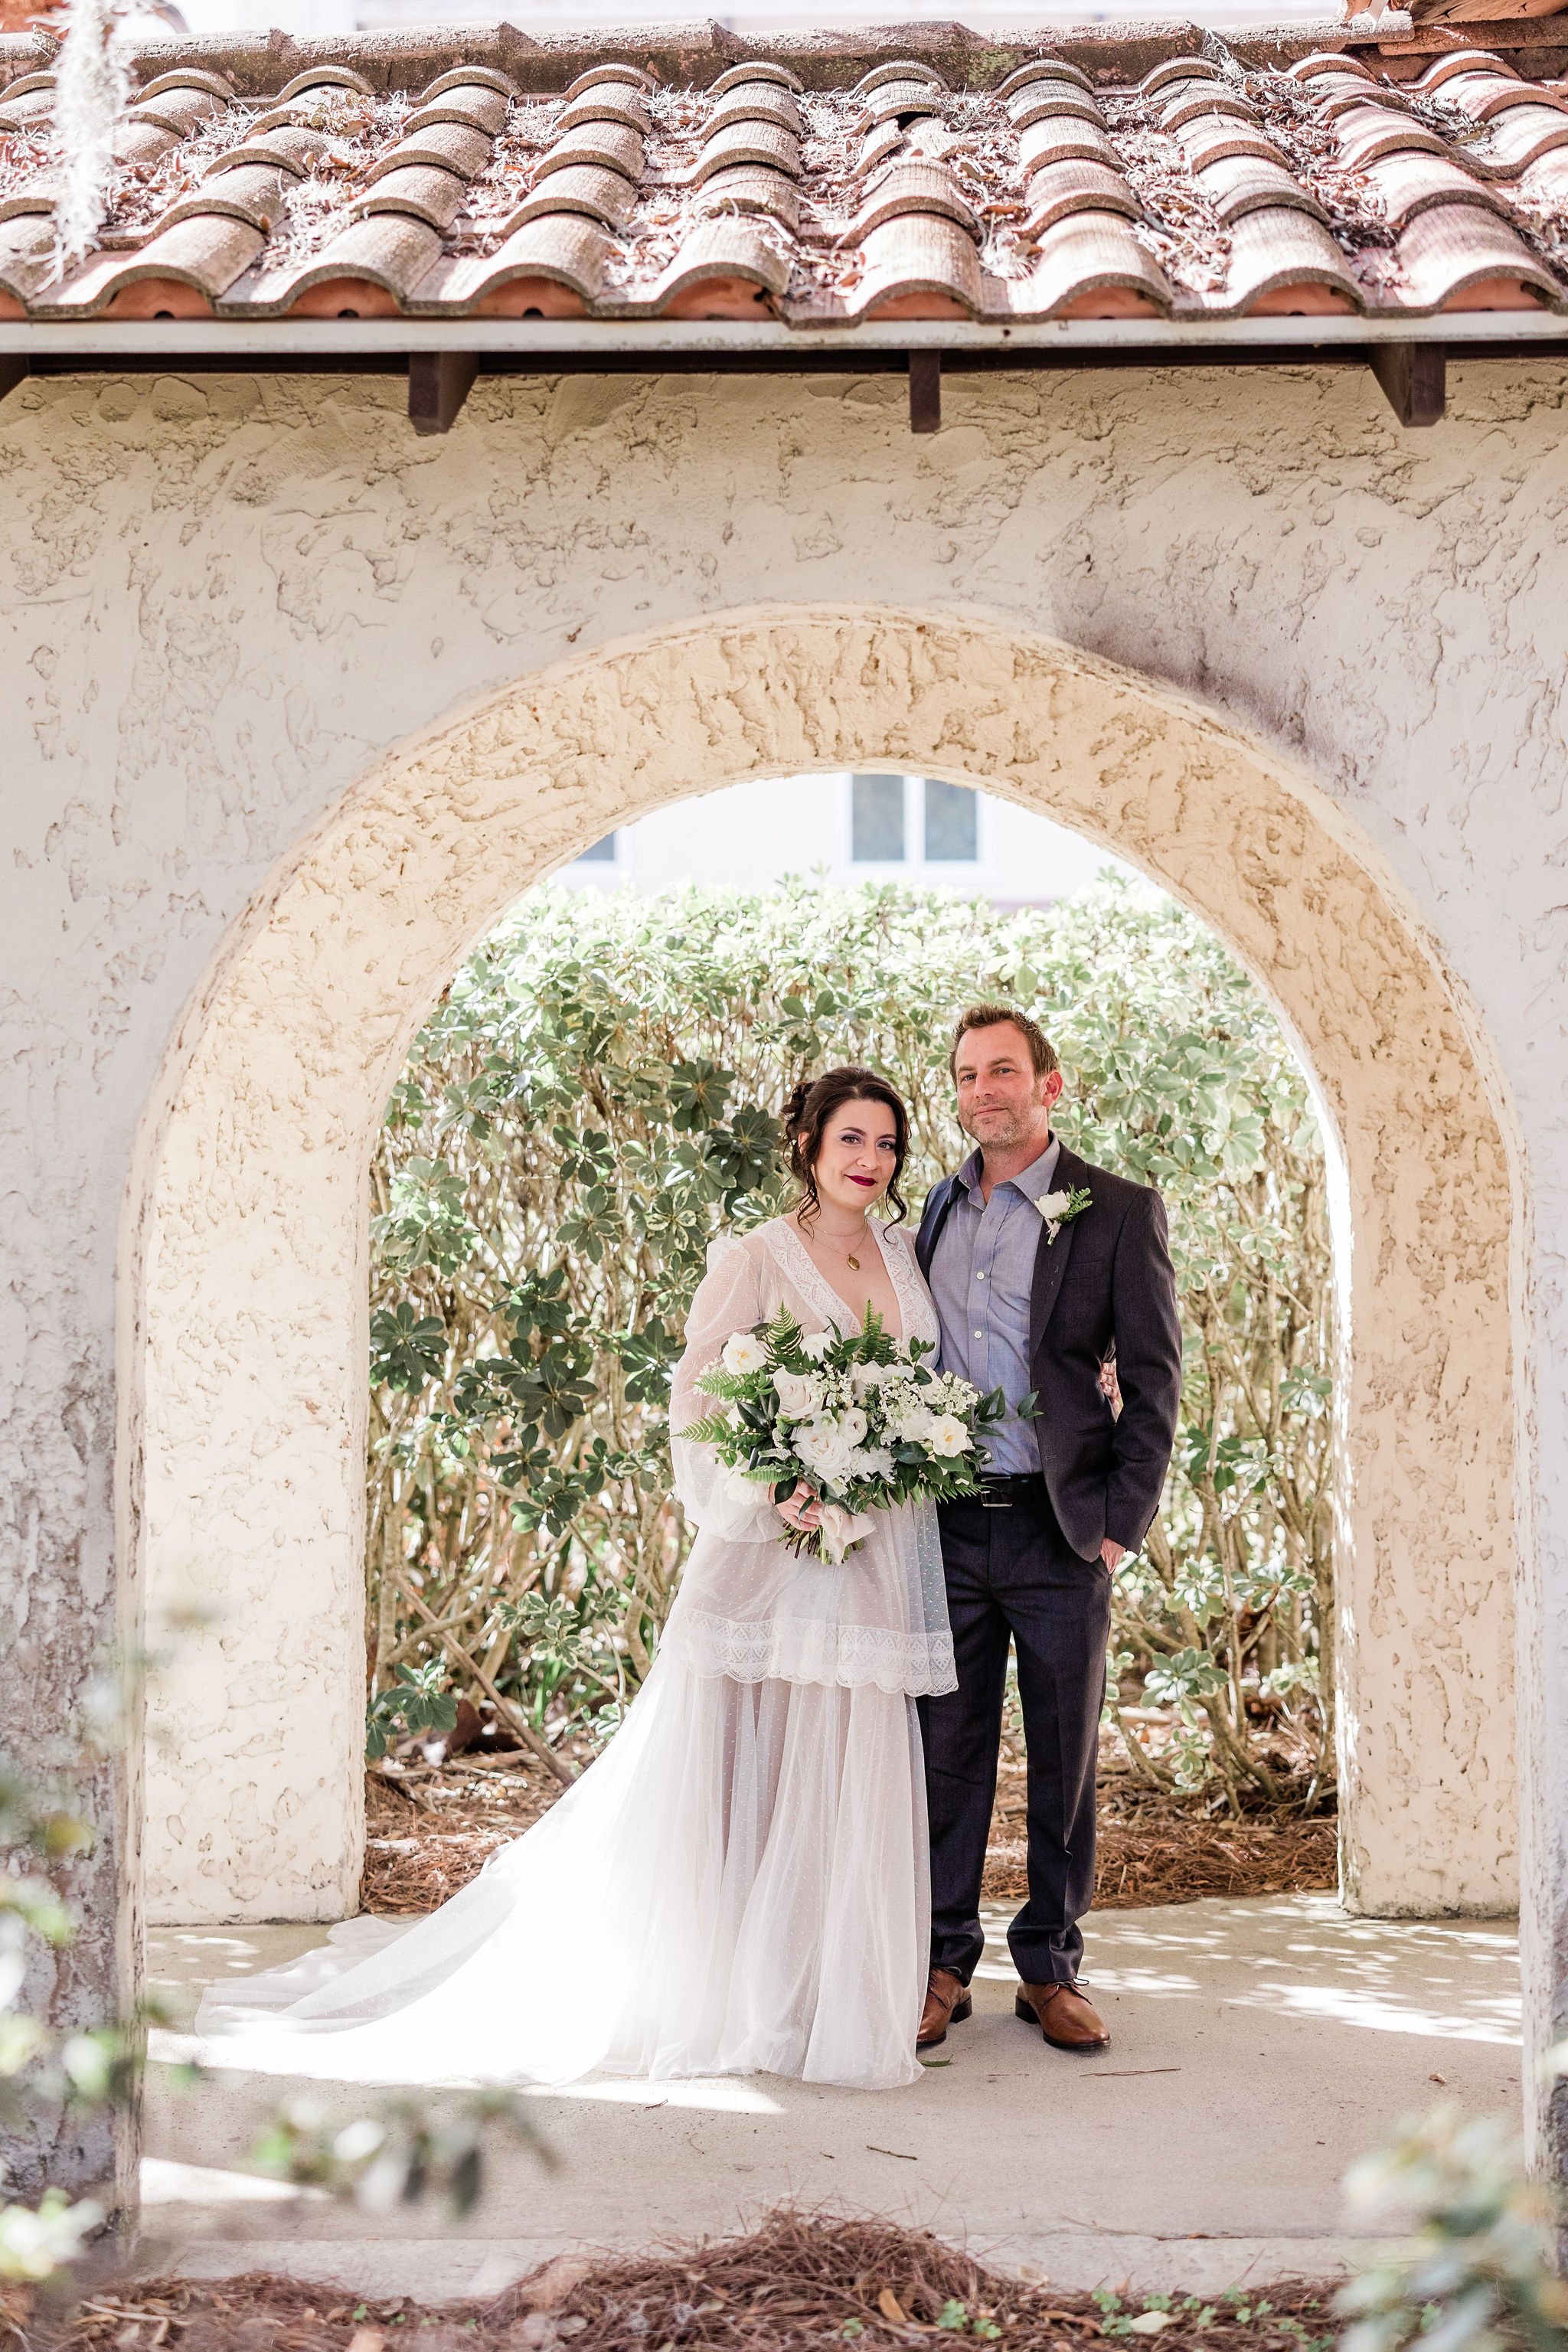 Candice and Michaels Lush Green Wedding at 700 Wilmington in Savannah, Georgia — Ivory and Beau